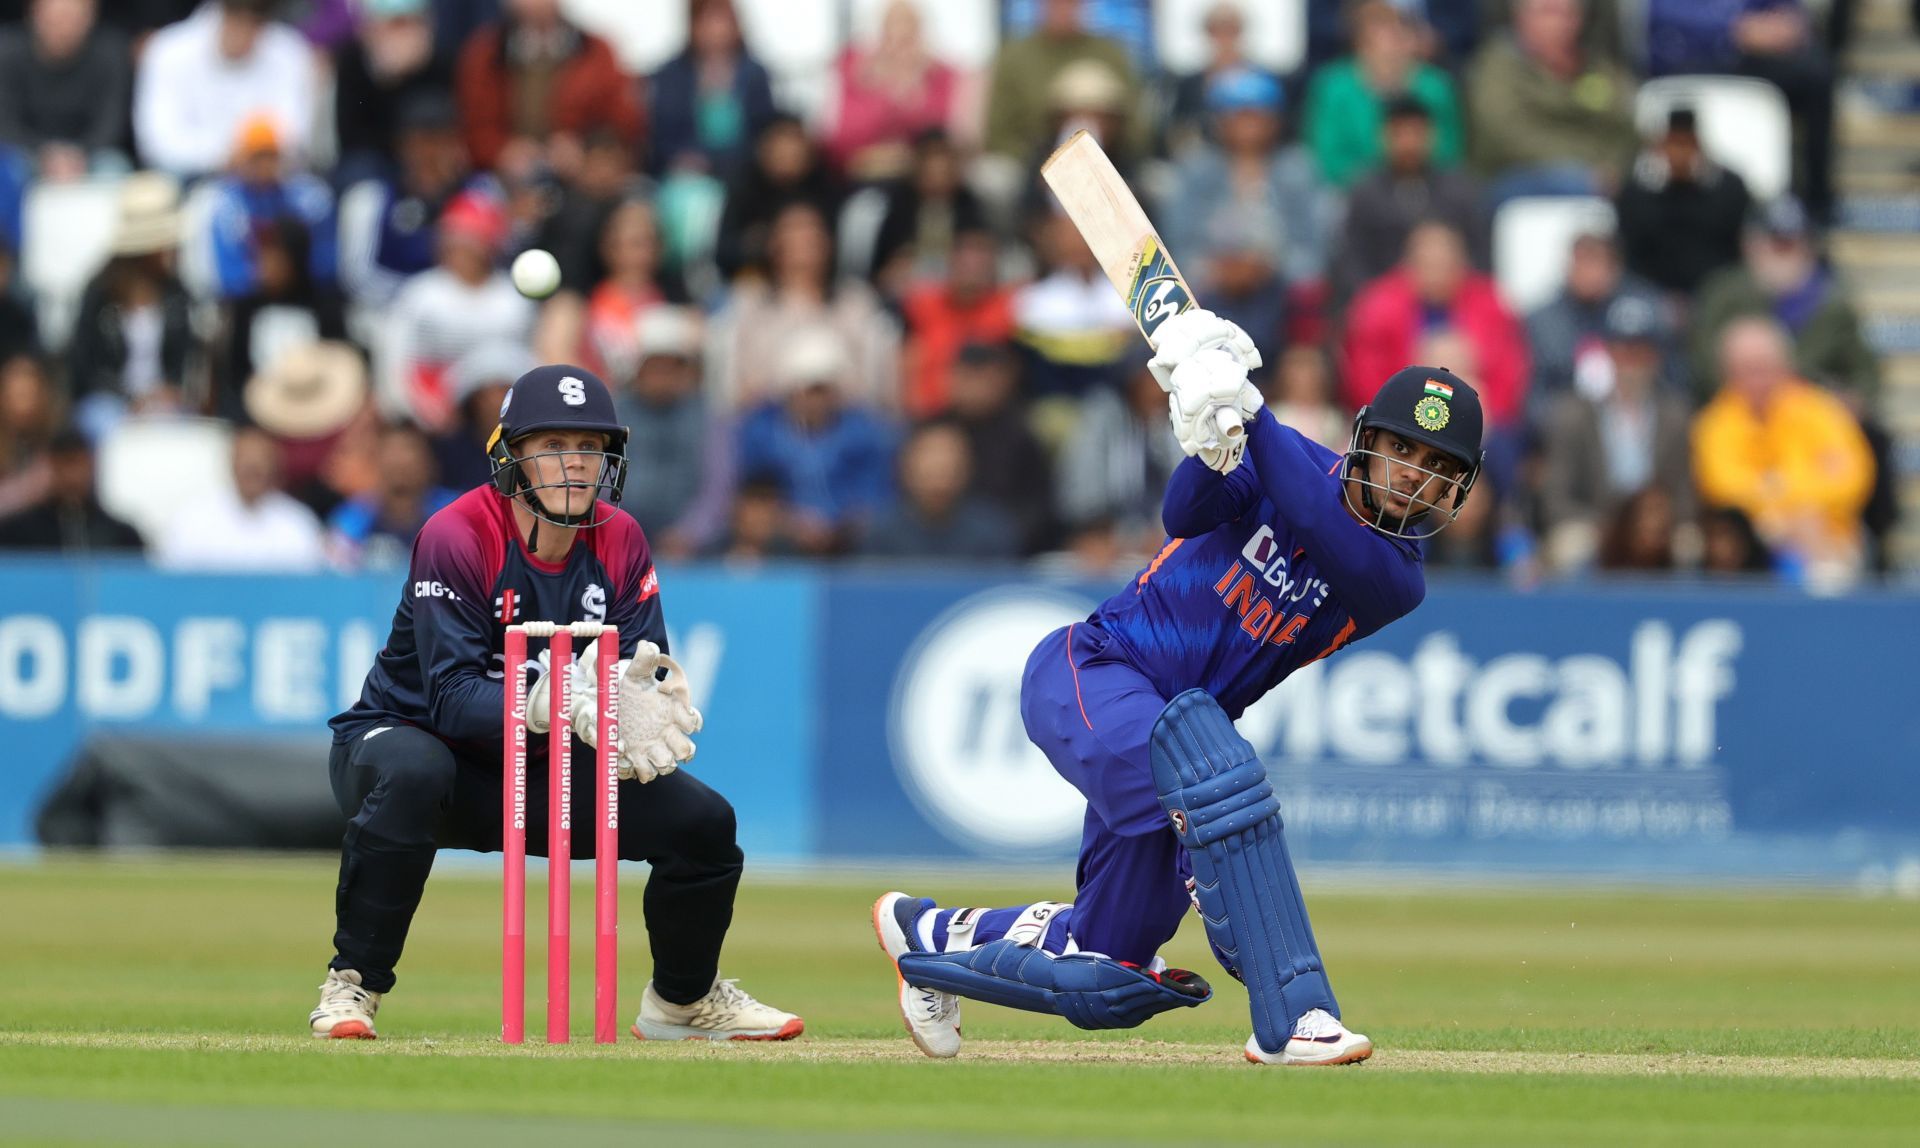 Ishan Kishan batting in a match in the recent England tour. (Credits: Getty).